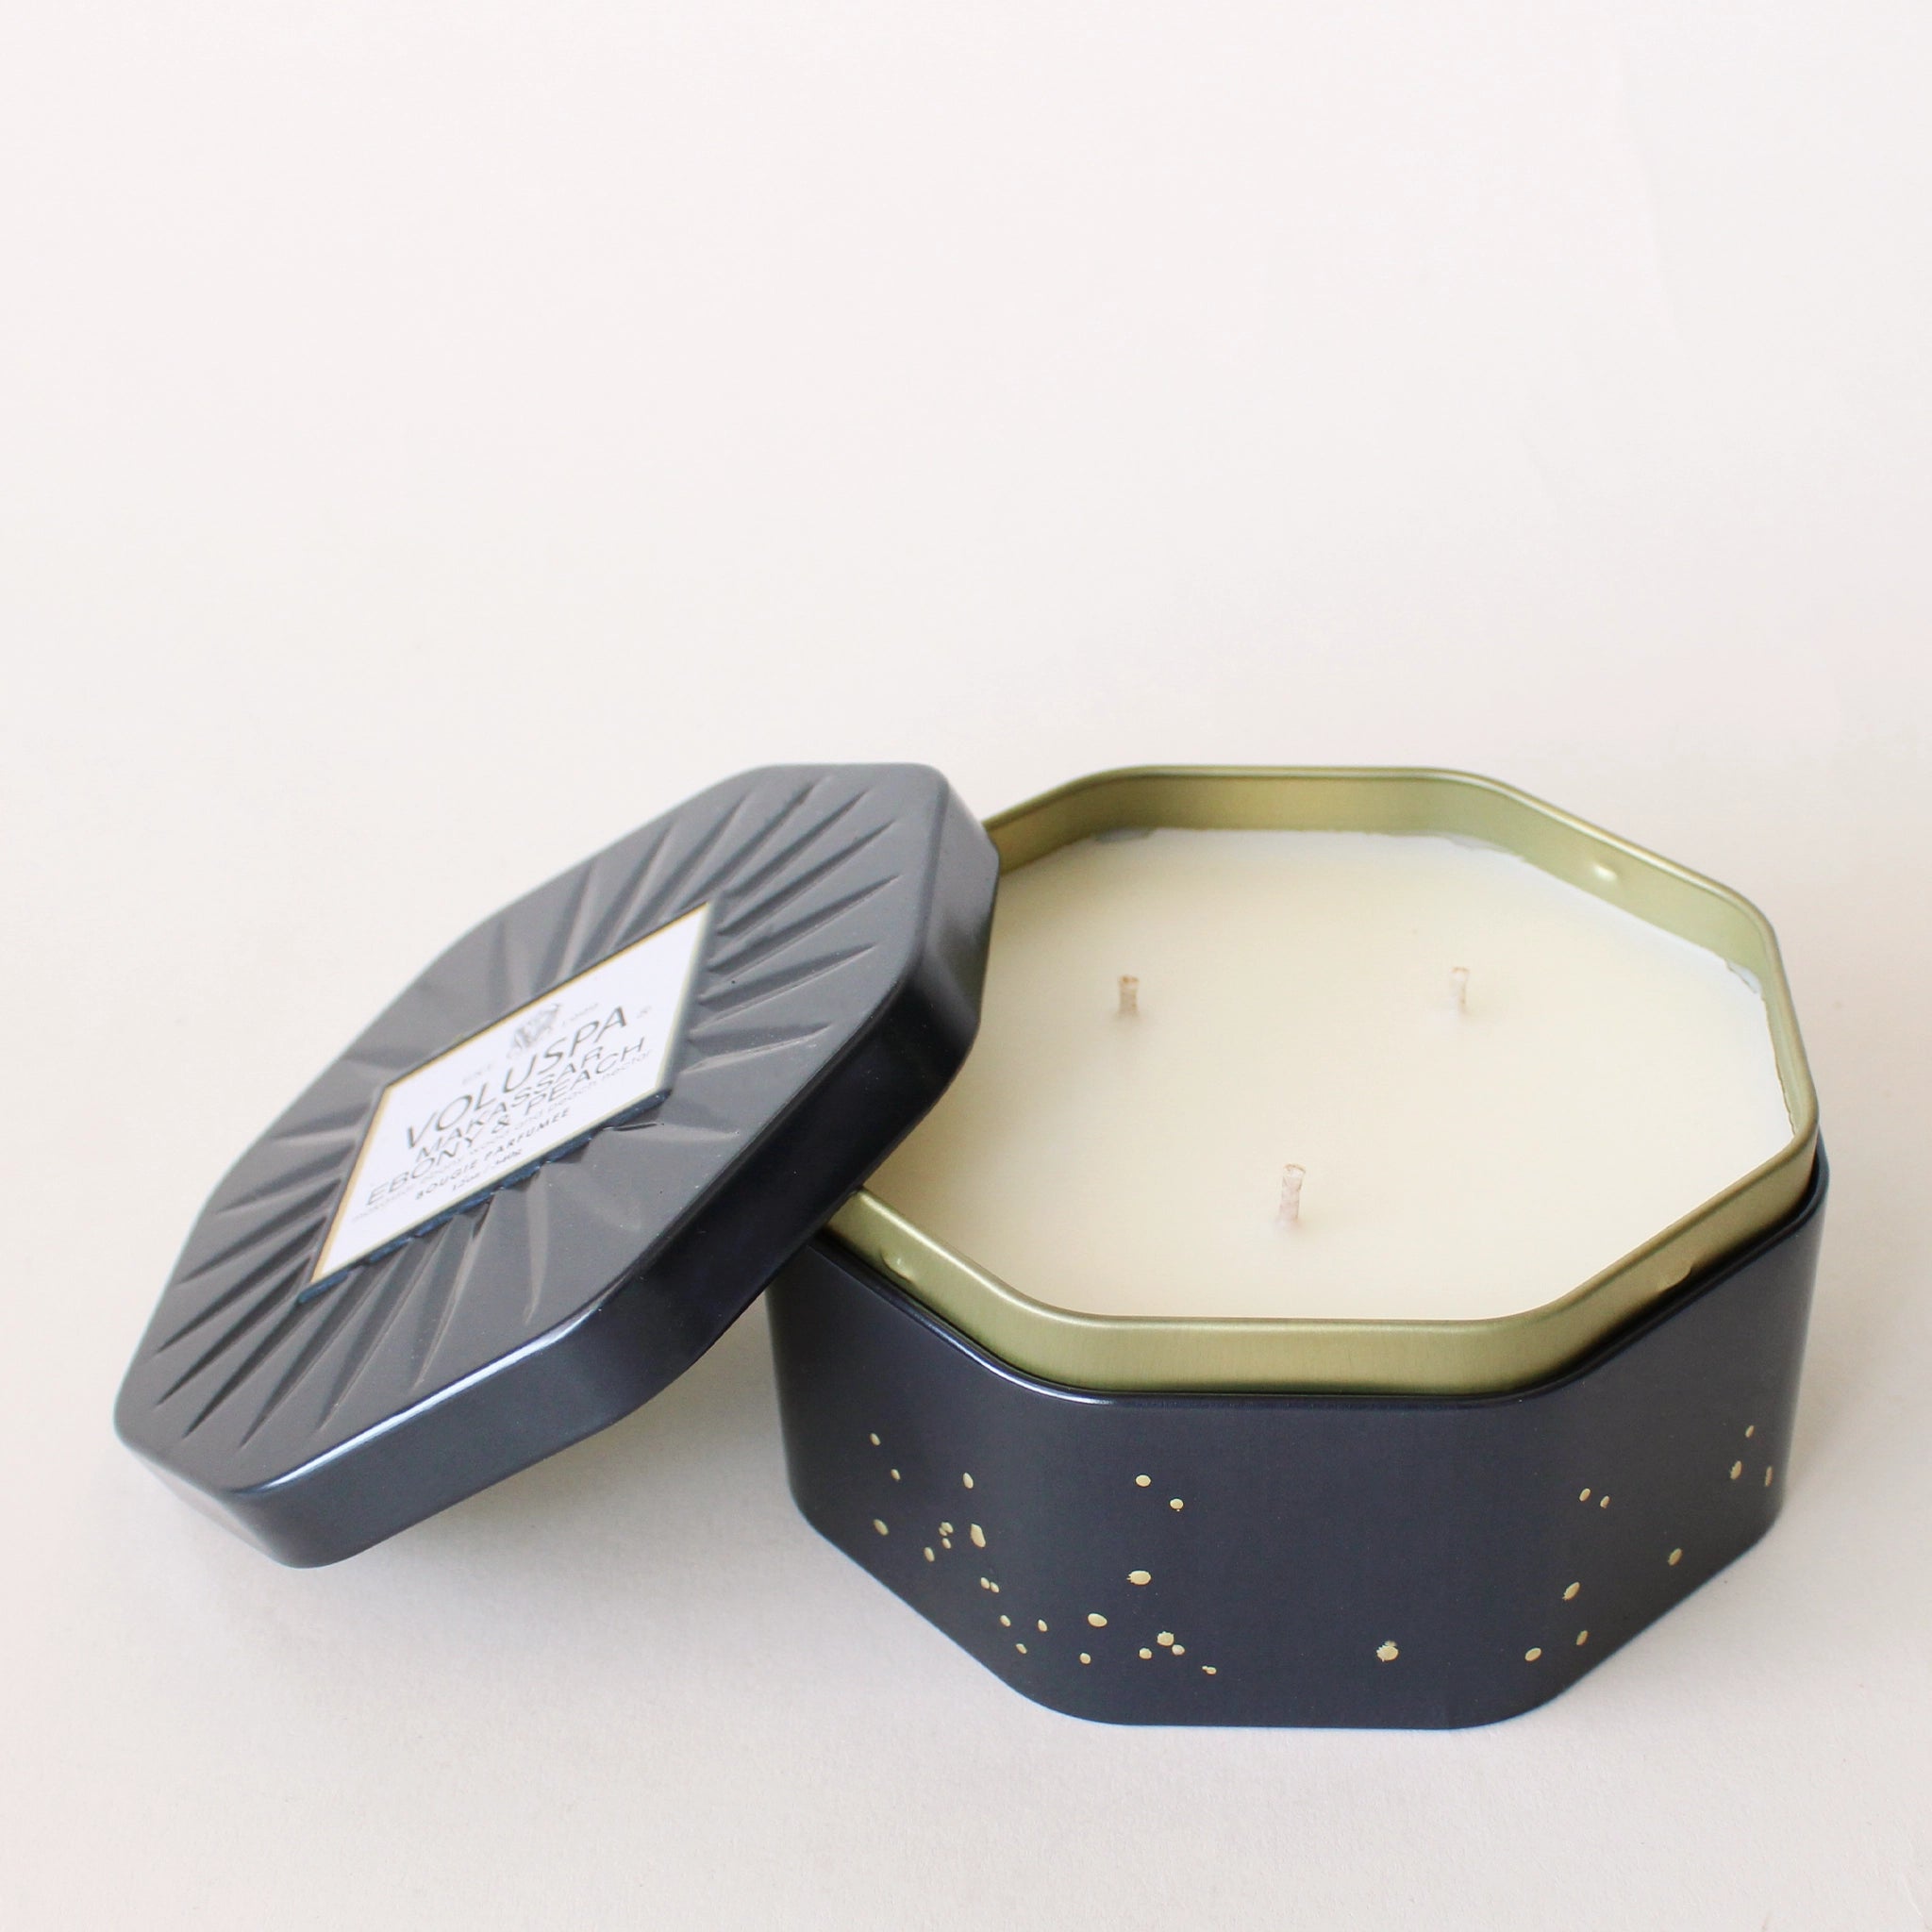 On a white background is an octagon shaped tin candle with three wicks, white wax and small gold speckle detailing. 